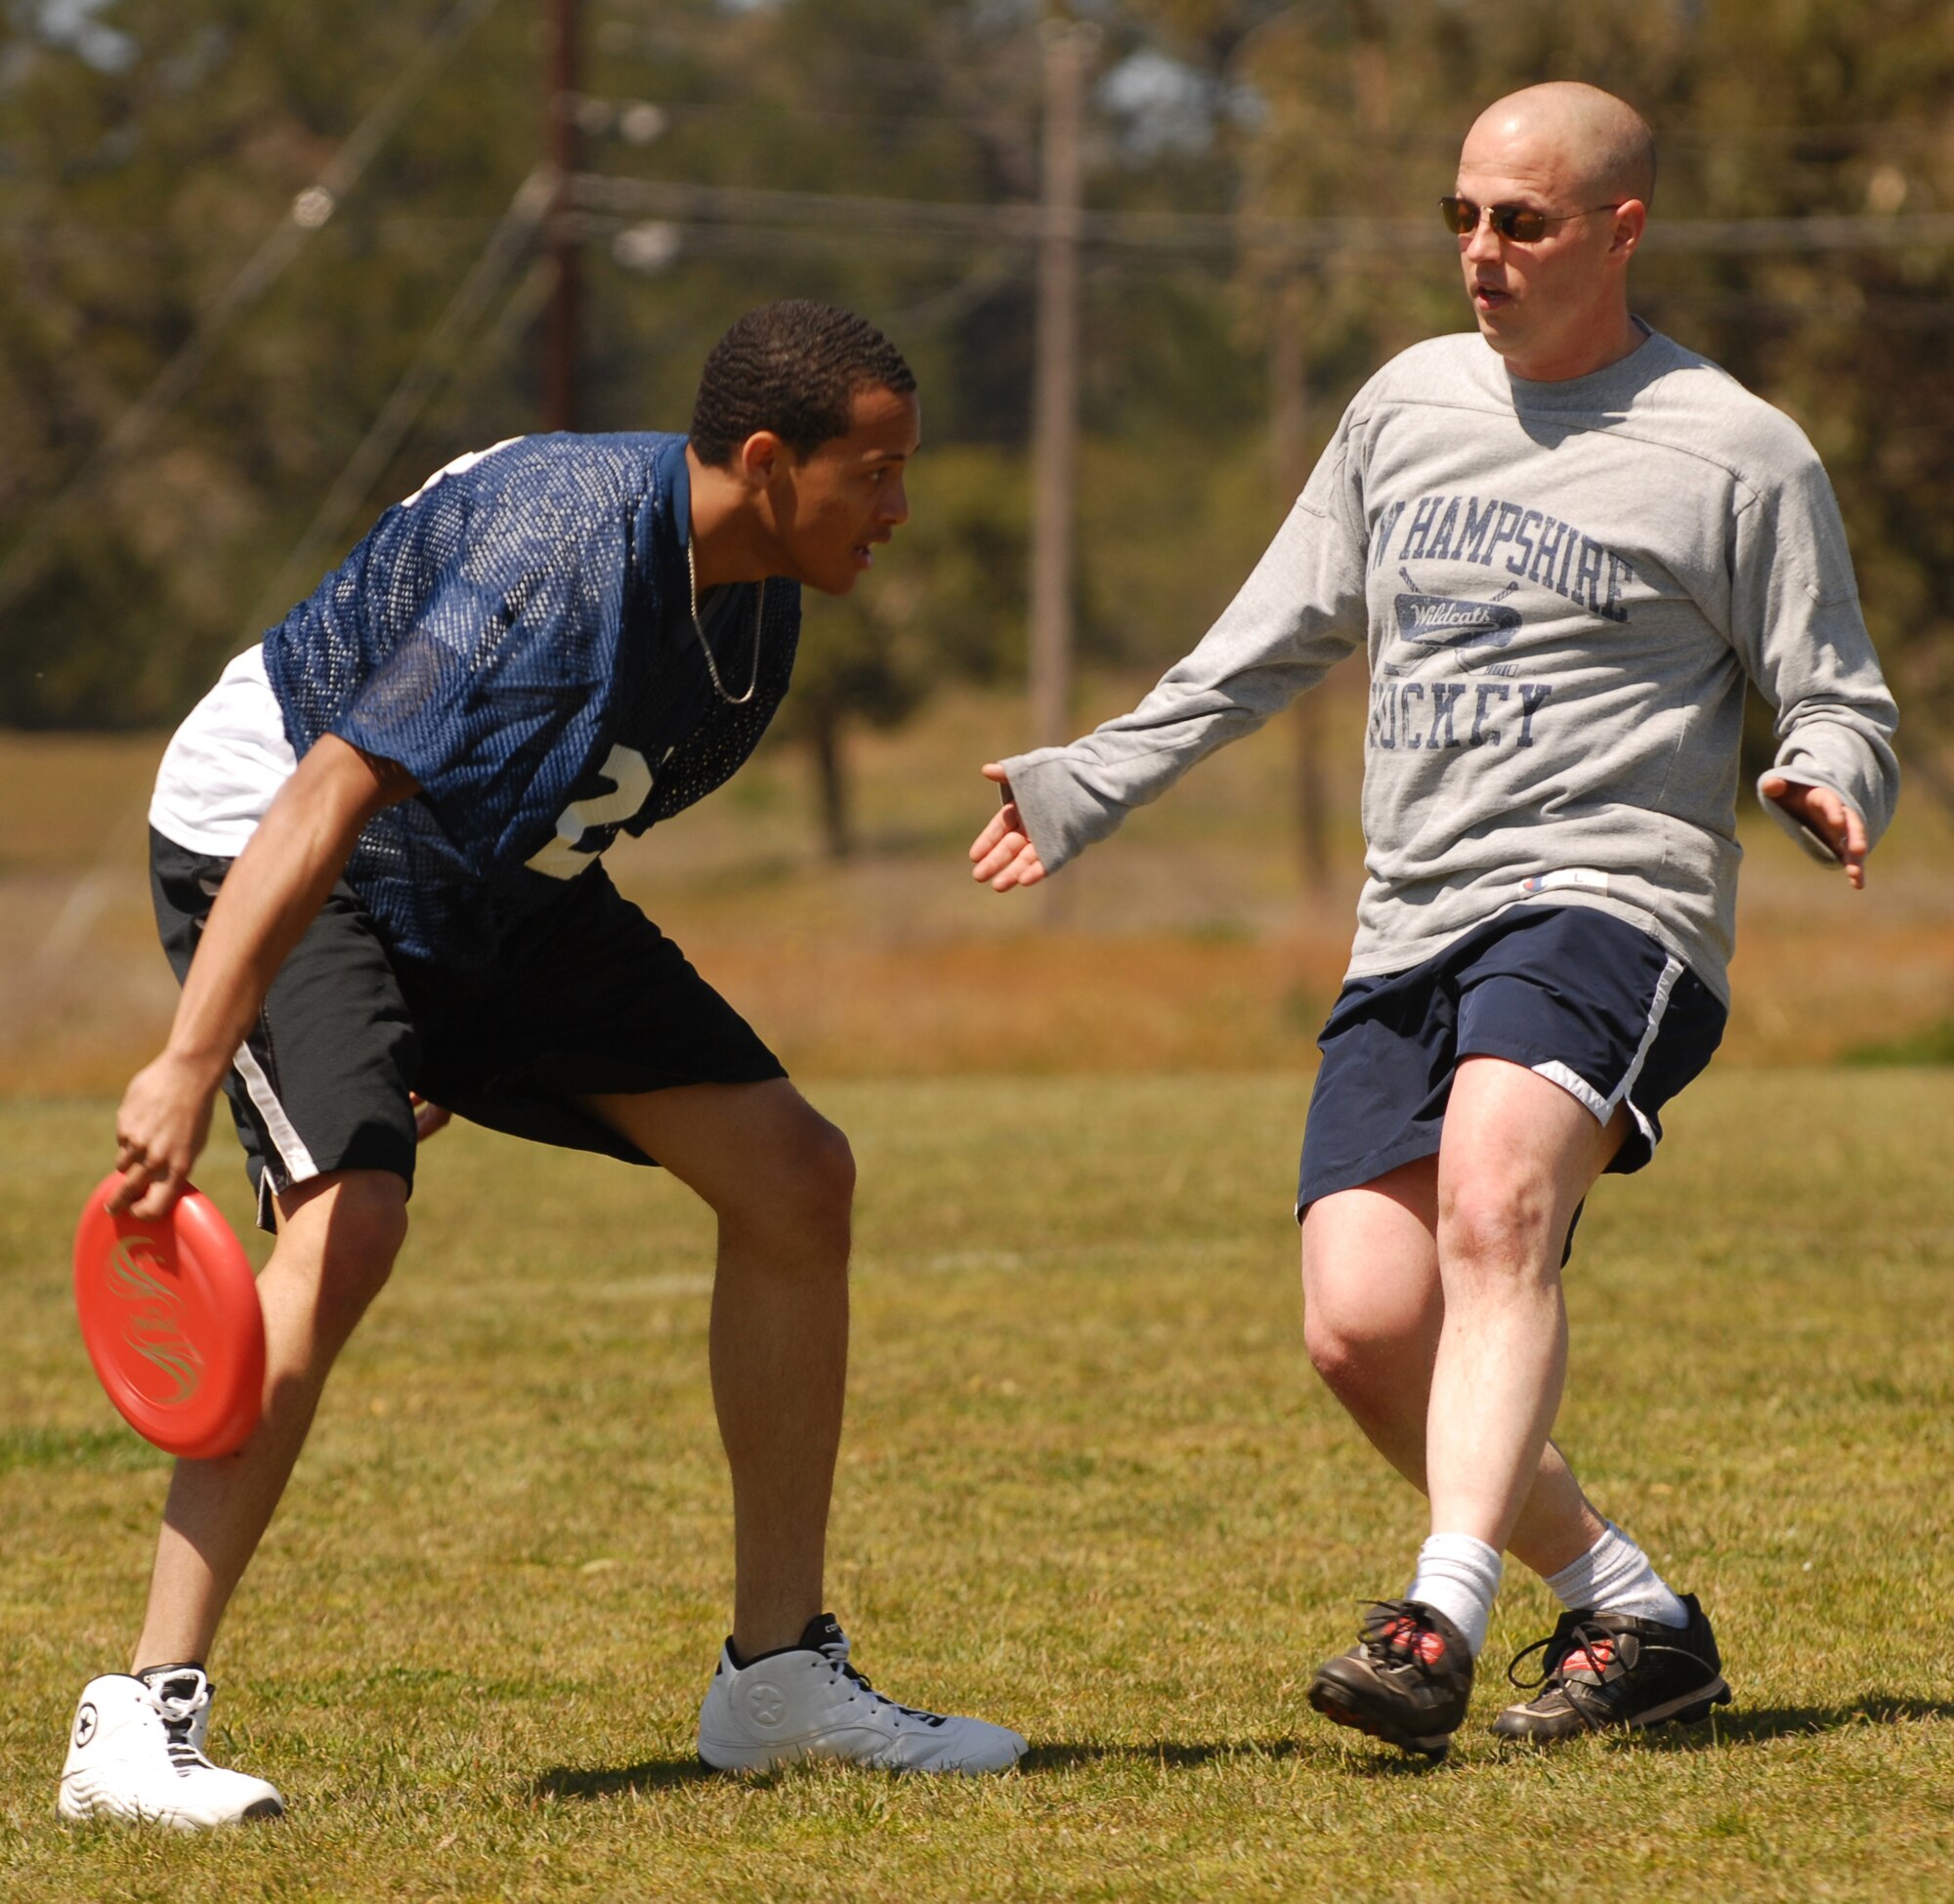 VANDENBERG AIR FORCE BASE, Calif. -- Lt. Col. Michael Dombrowski, the 30th Space Communications Squadron commander, defends Airman Randolph Patterson, also with 30th SCS, during an ultimate Frisbee match April 3 at the base track. Sports days are one of the many events used to build moral within squadrons. (U.S. Air Force photo/Airman 1st Class Antoinette Lyons)